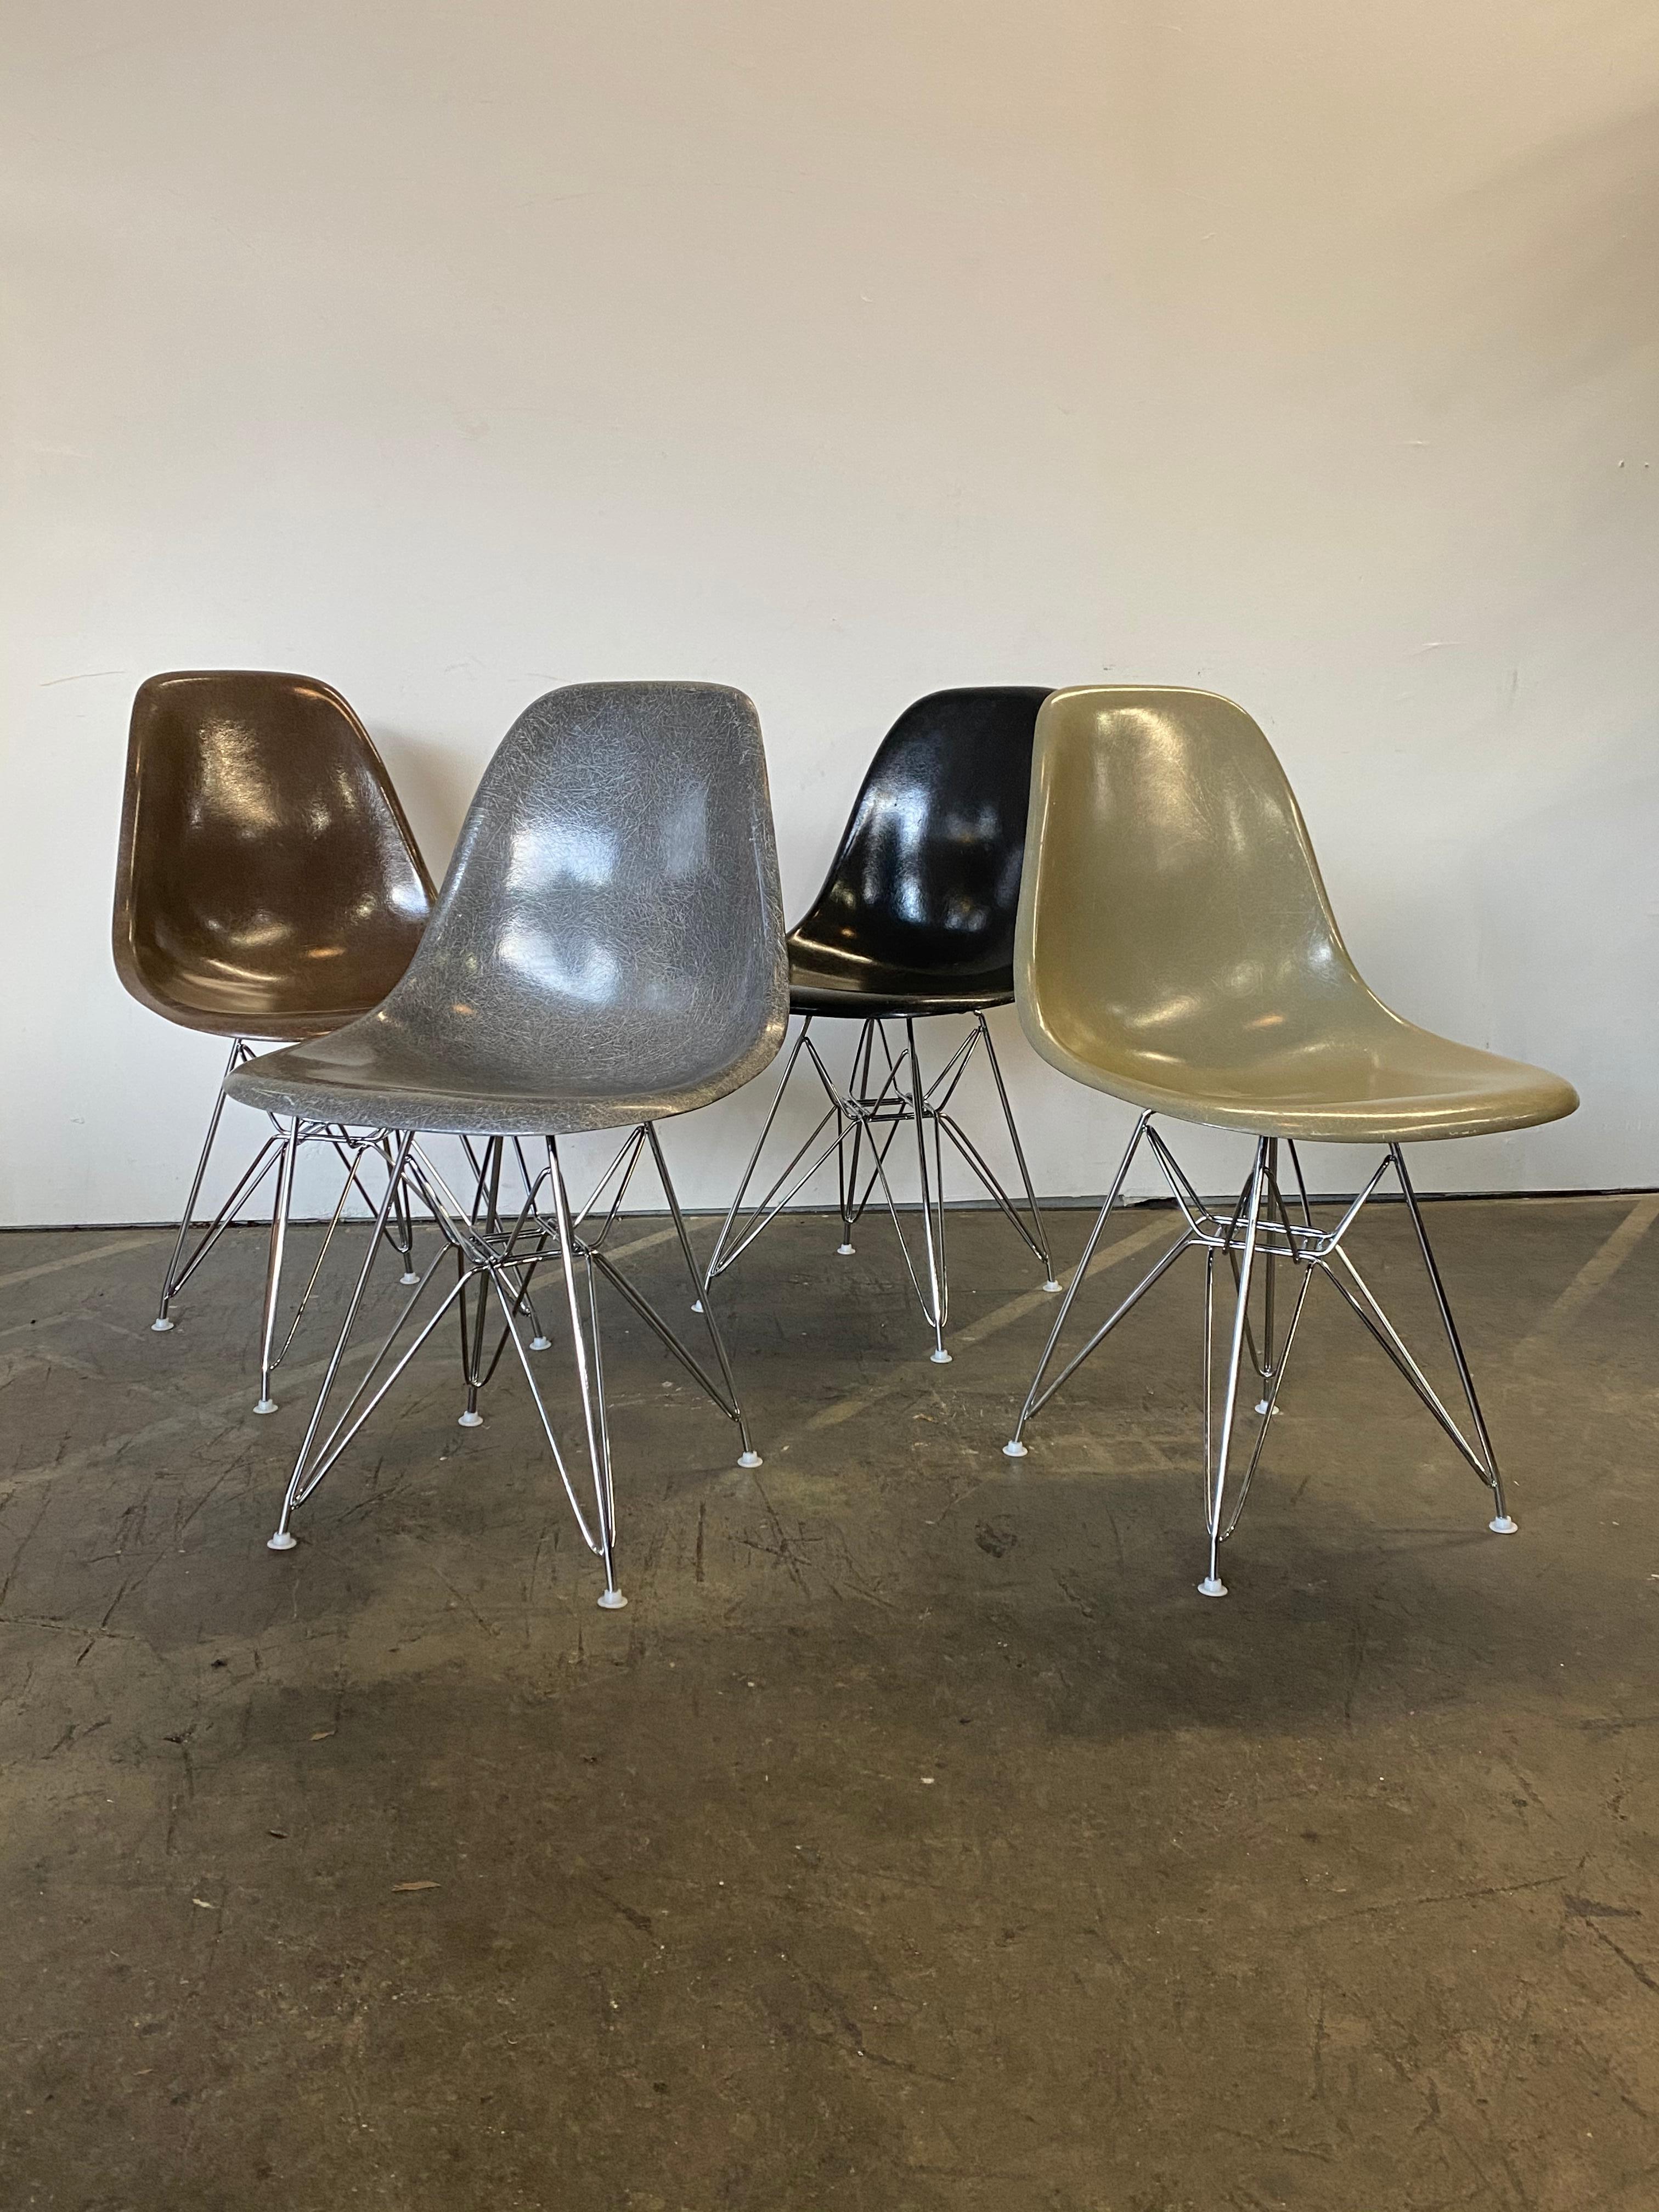 20th Century Herman Miller Eames DSR Dining Chairs in Earth Tones